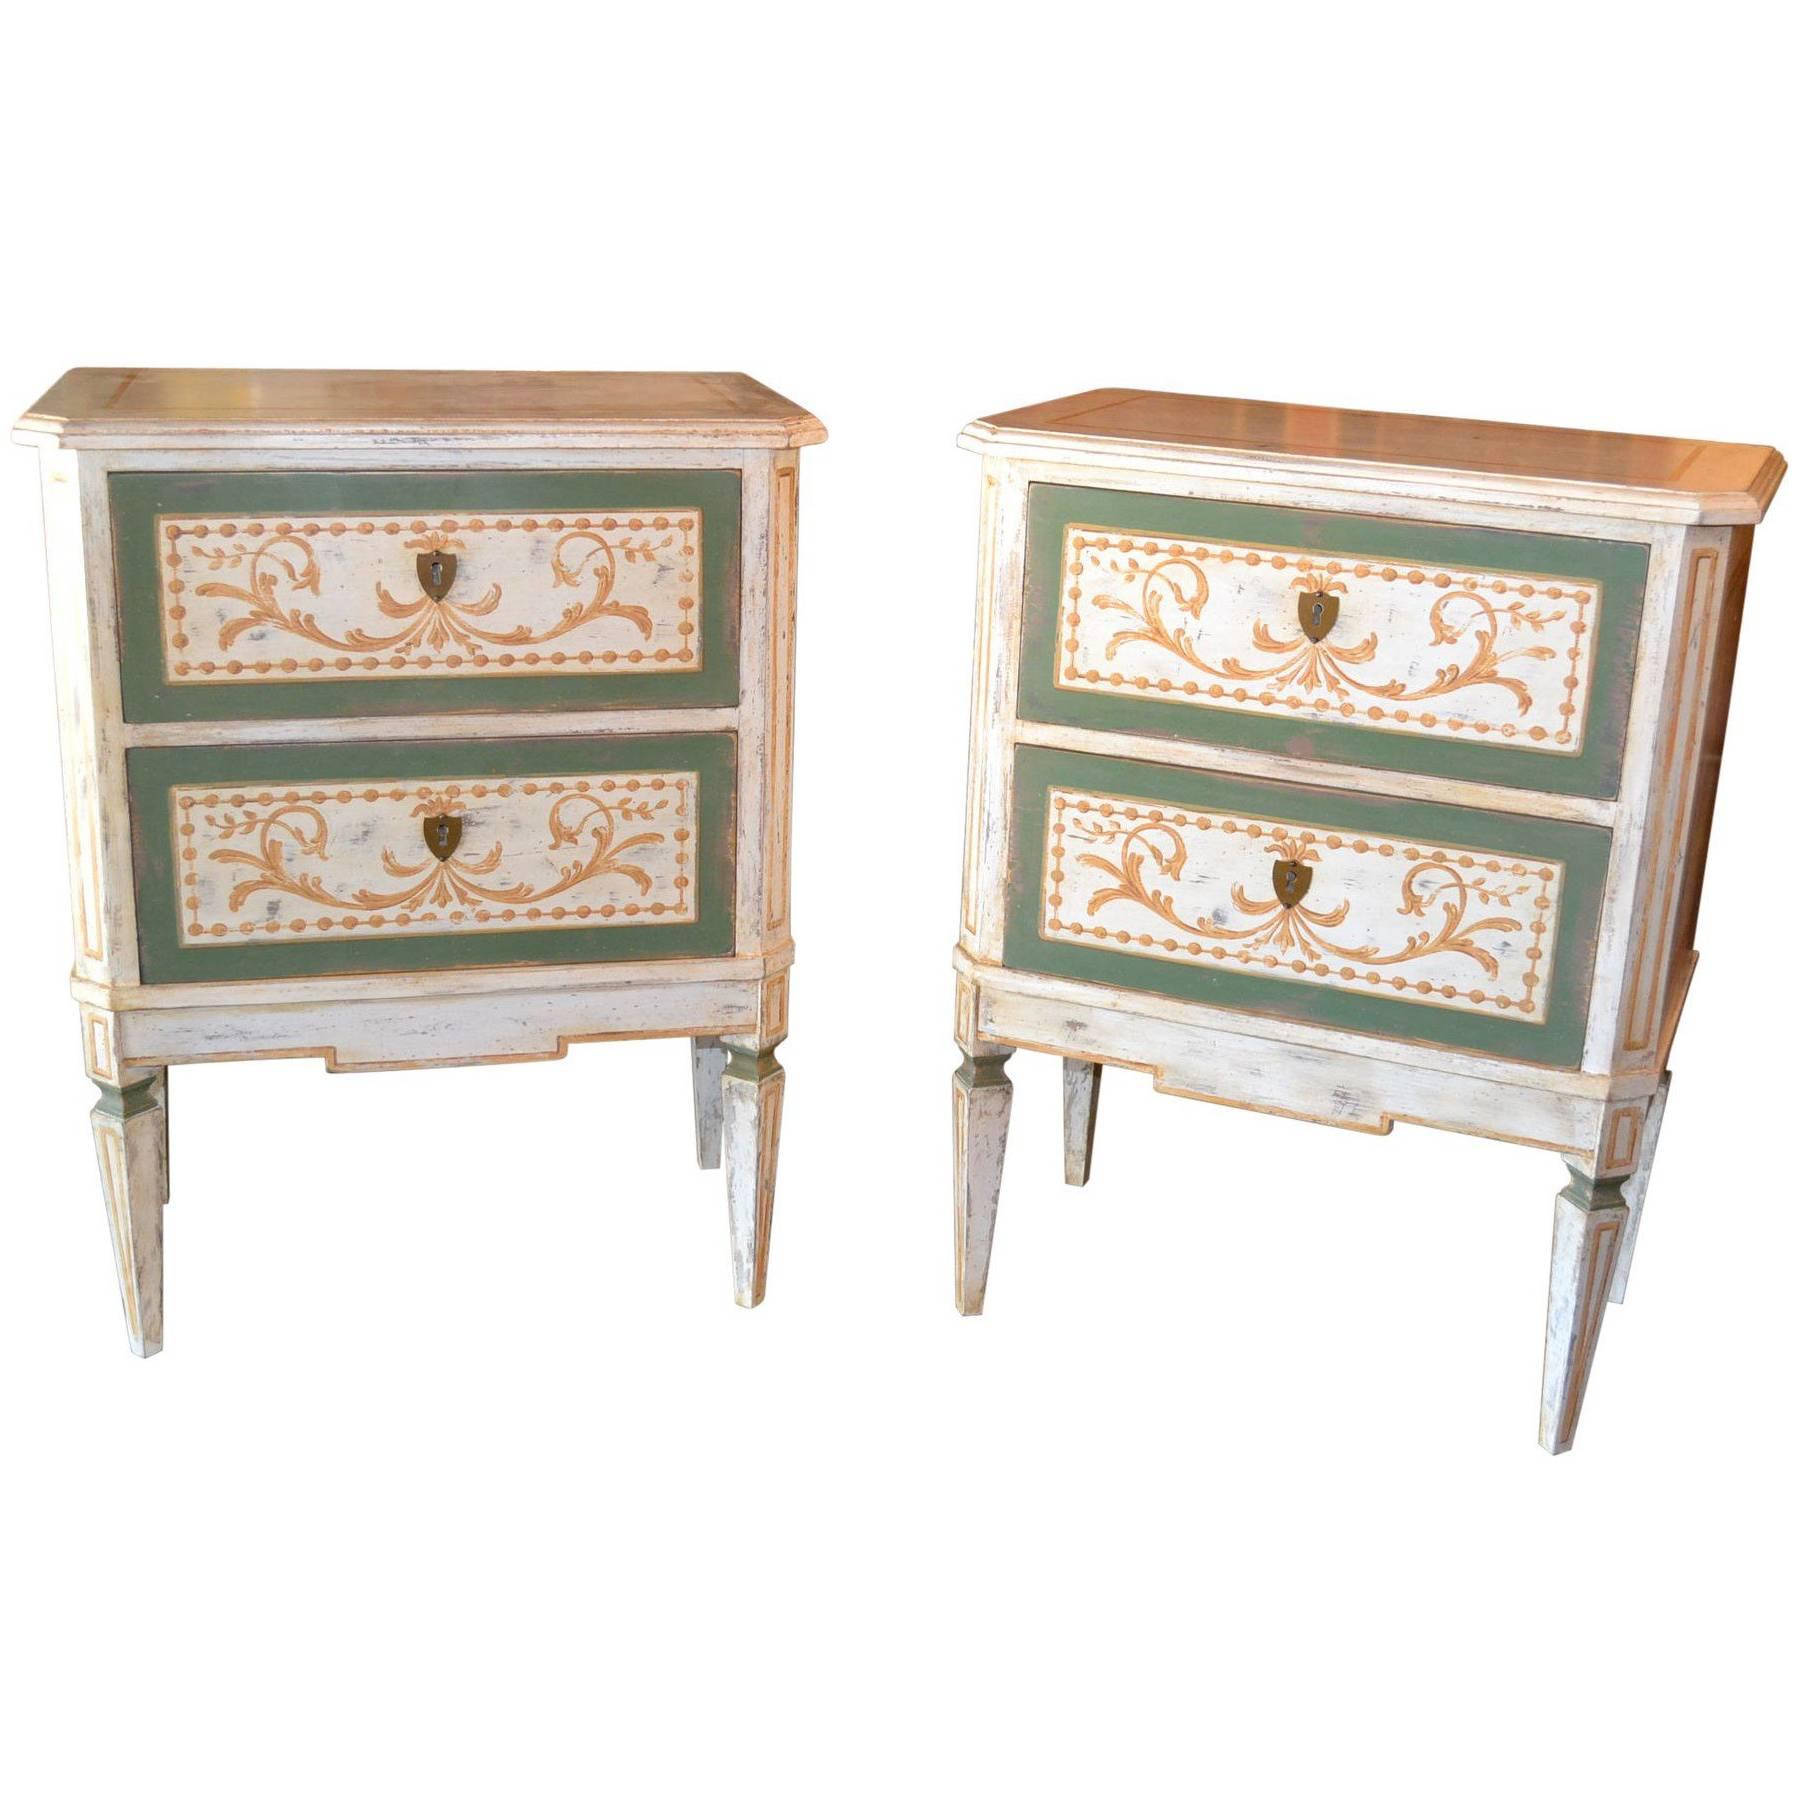 Pair of Neoclassical Painted Chests